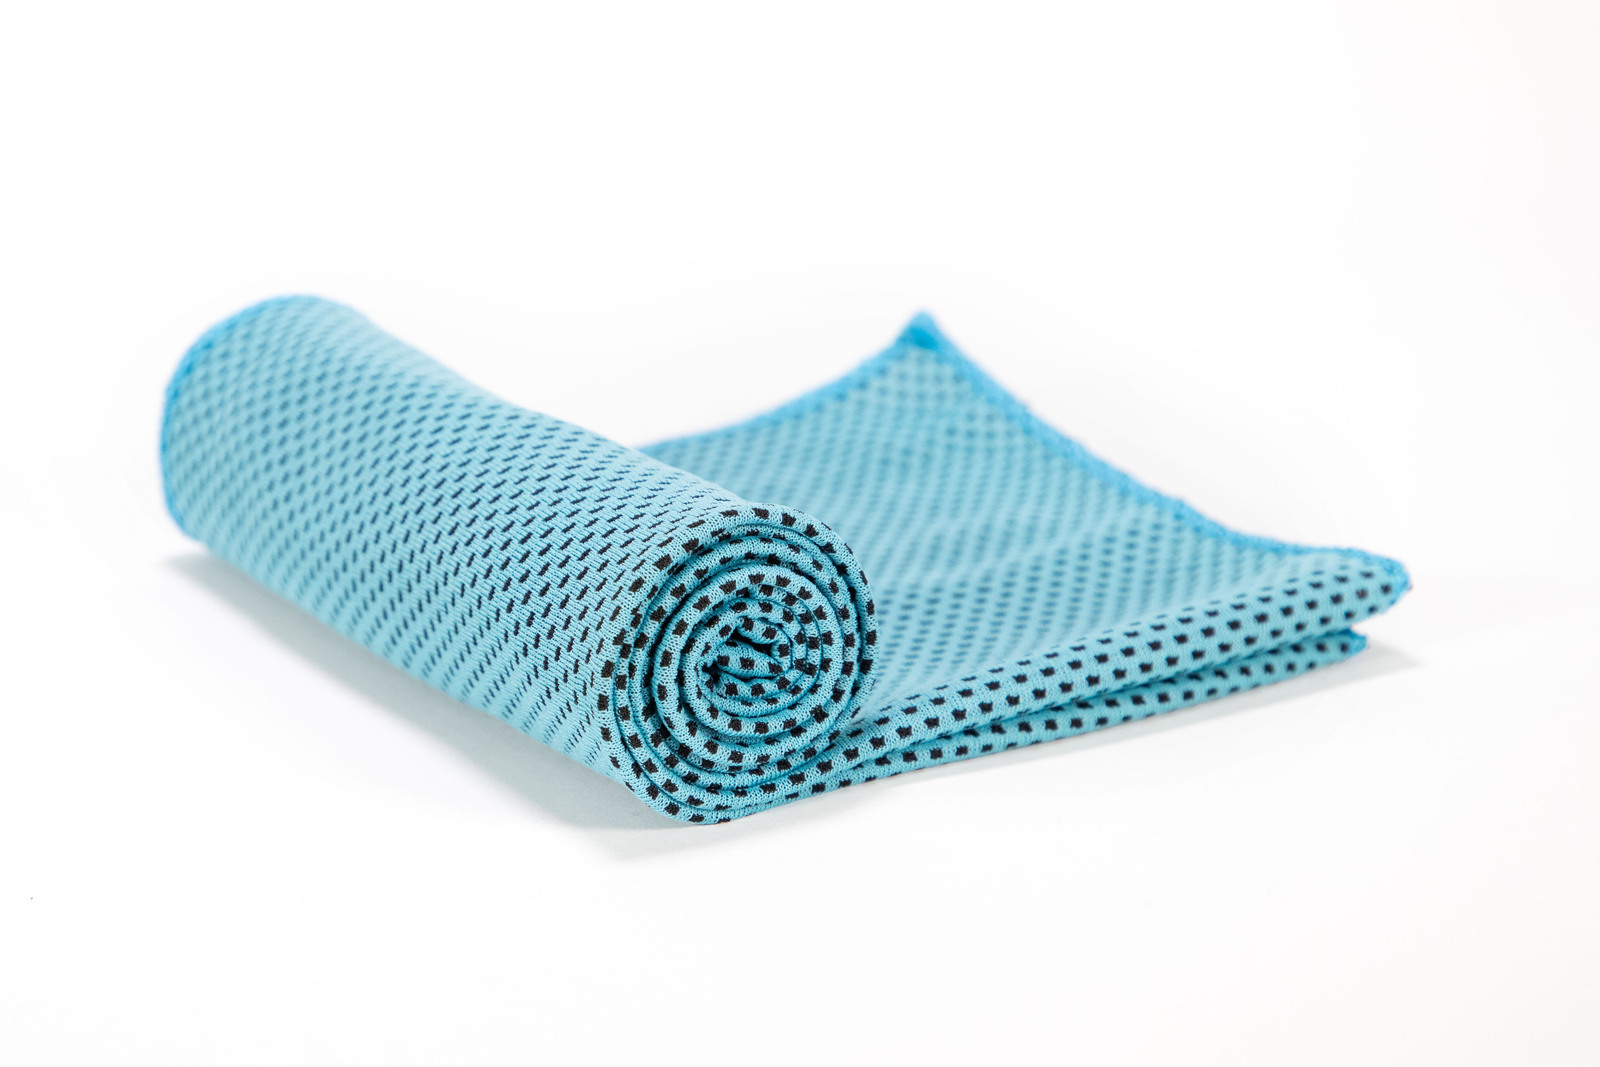 Mad Ally Cooling Ice Towel; Blue